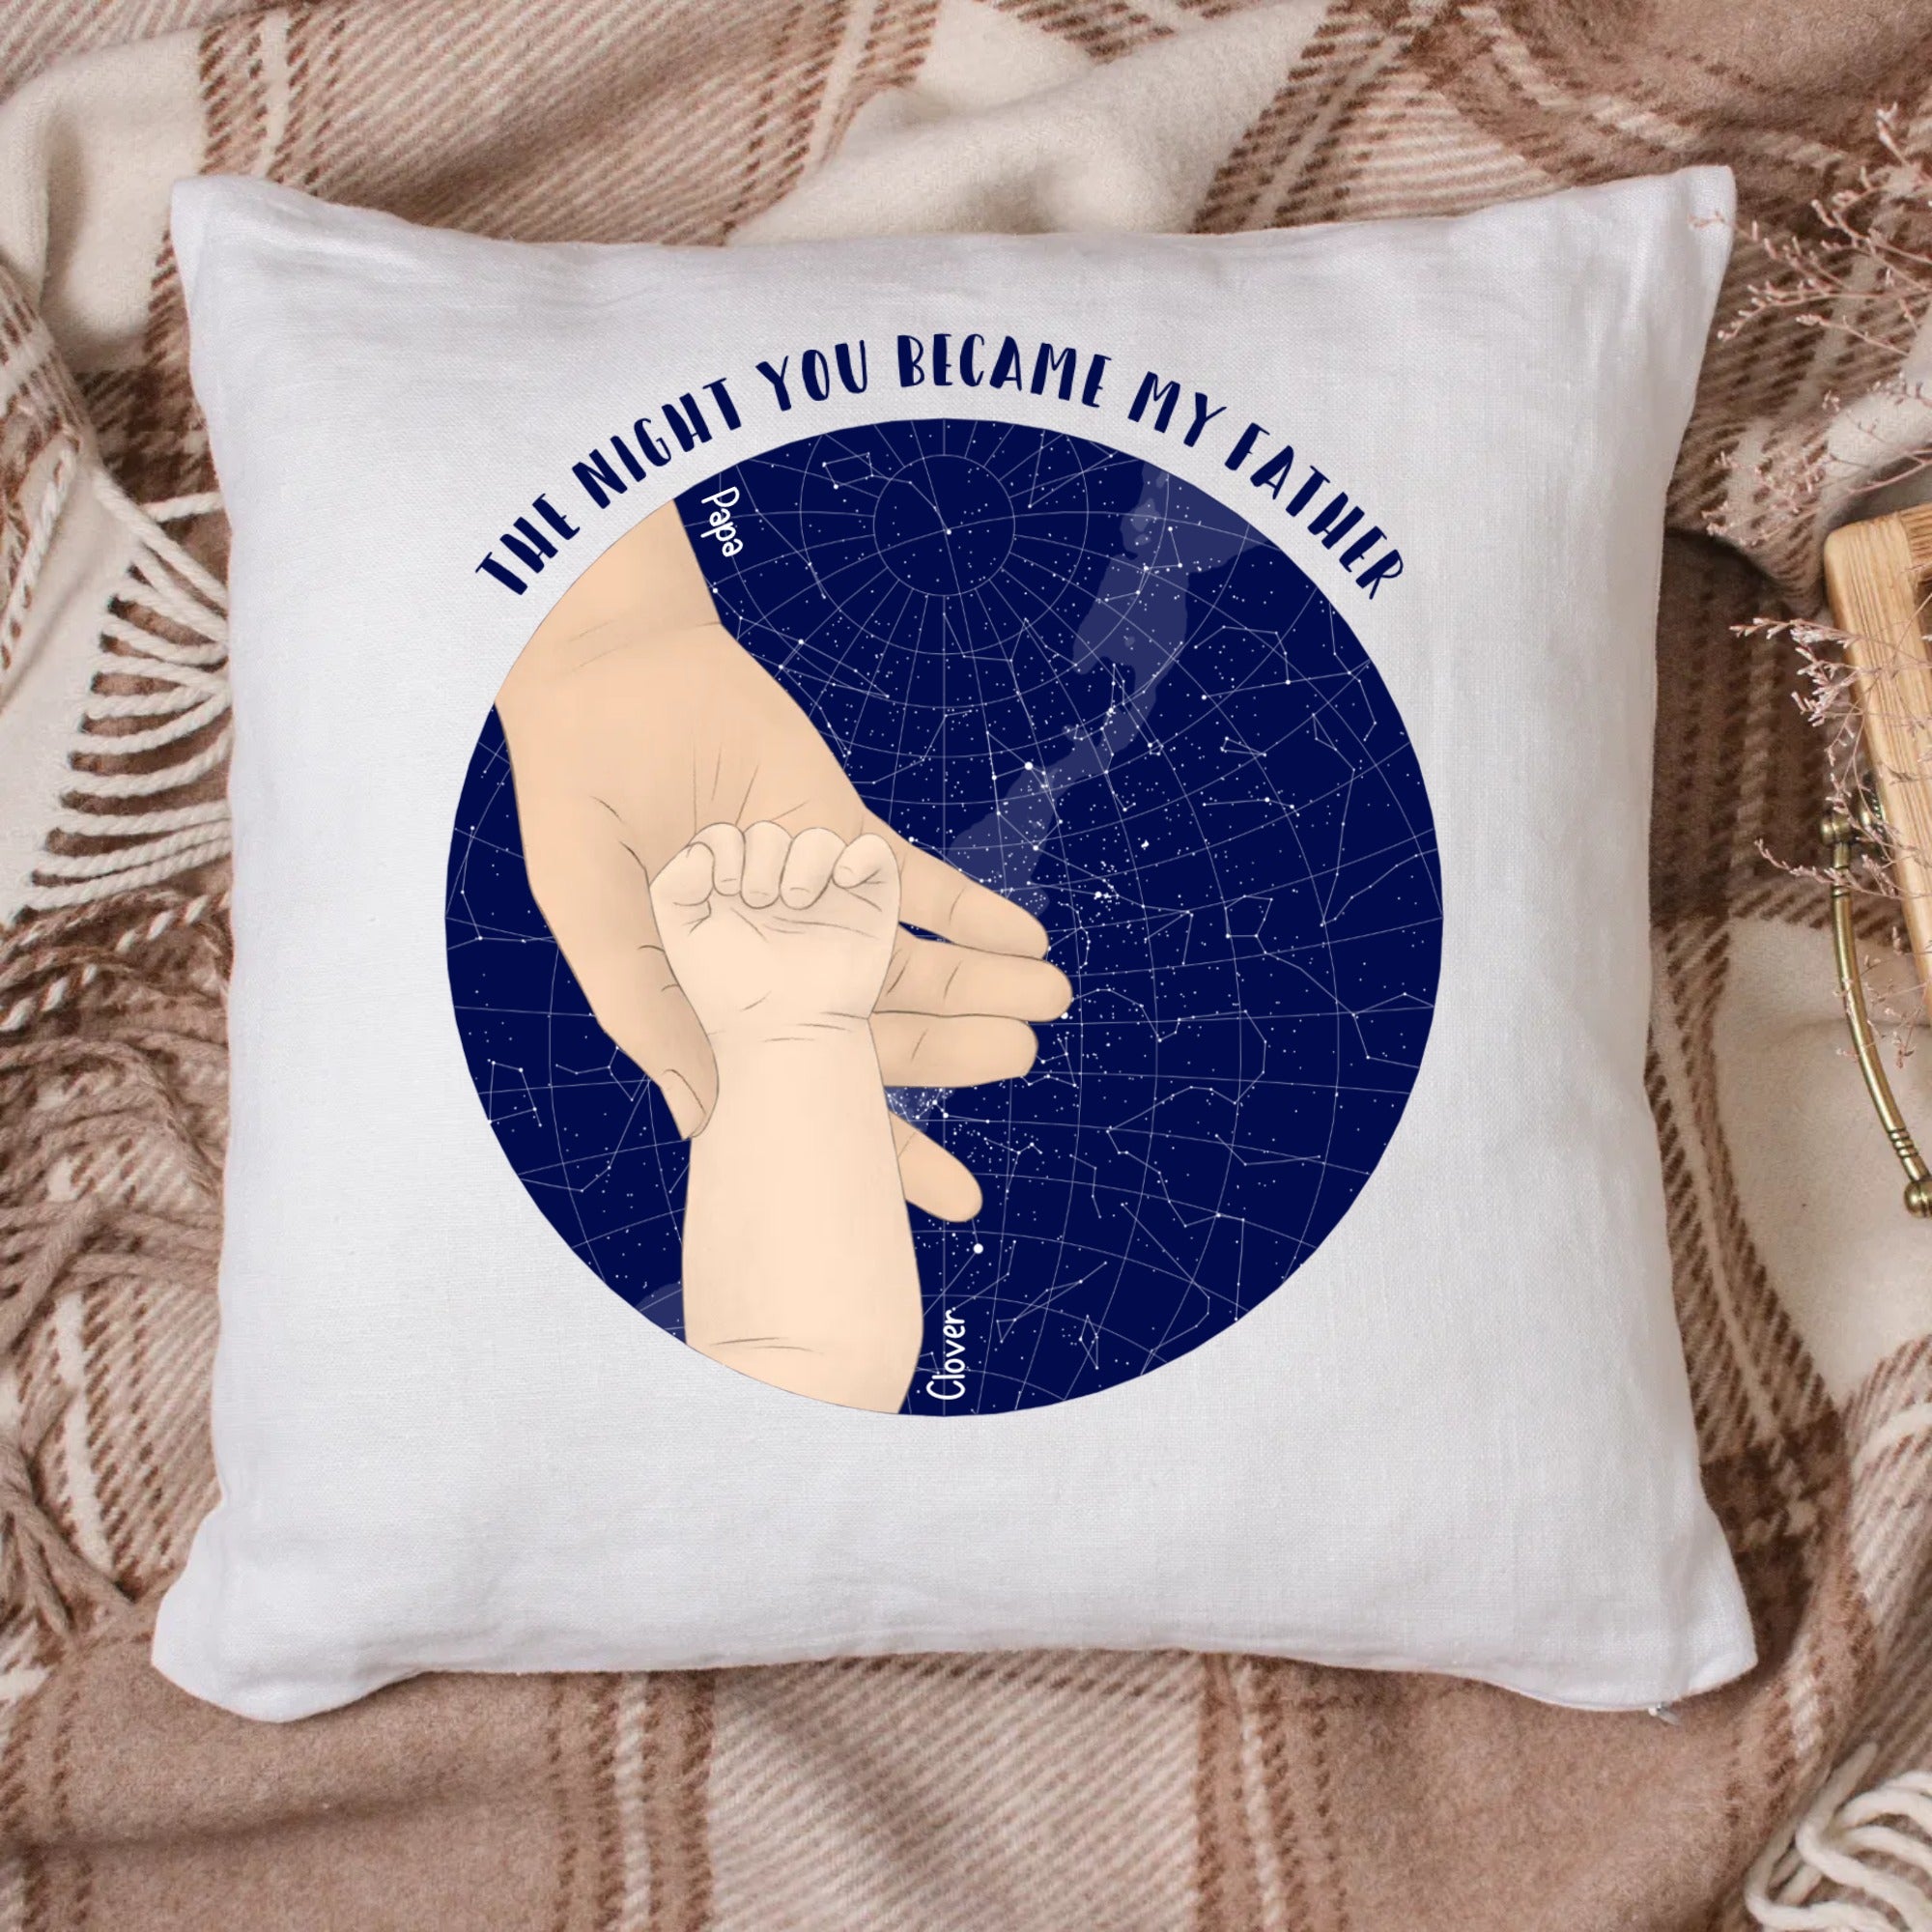 Eco Pillow Map Style - The night you became my dad